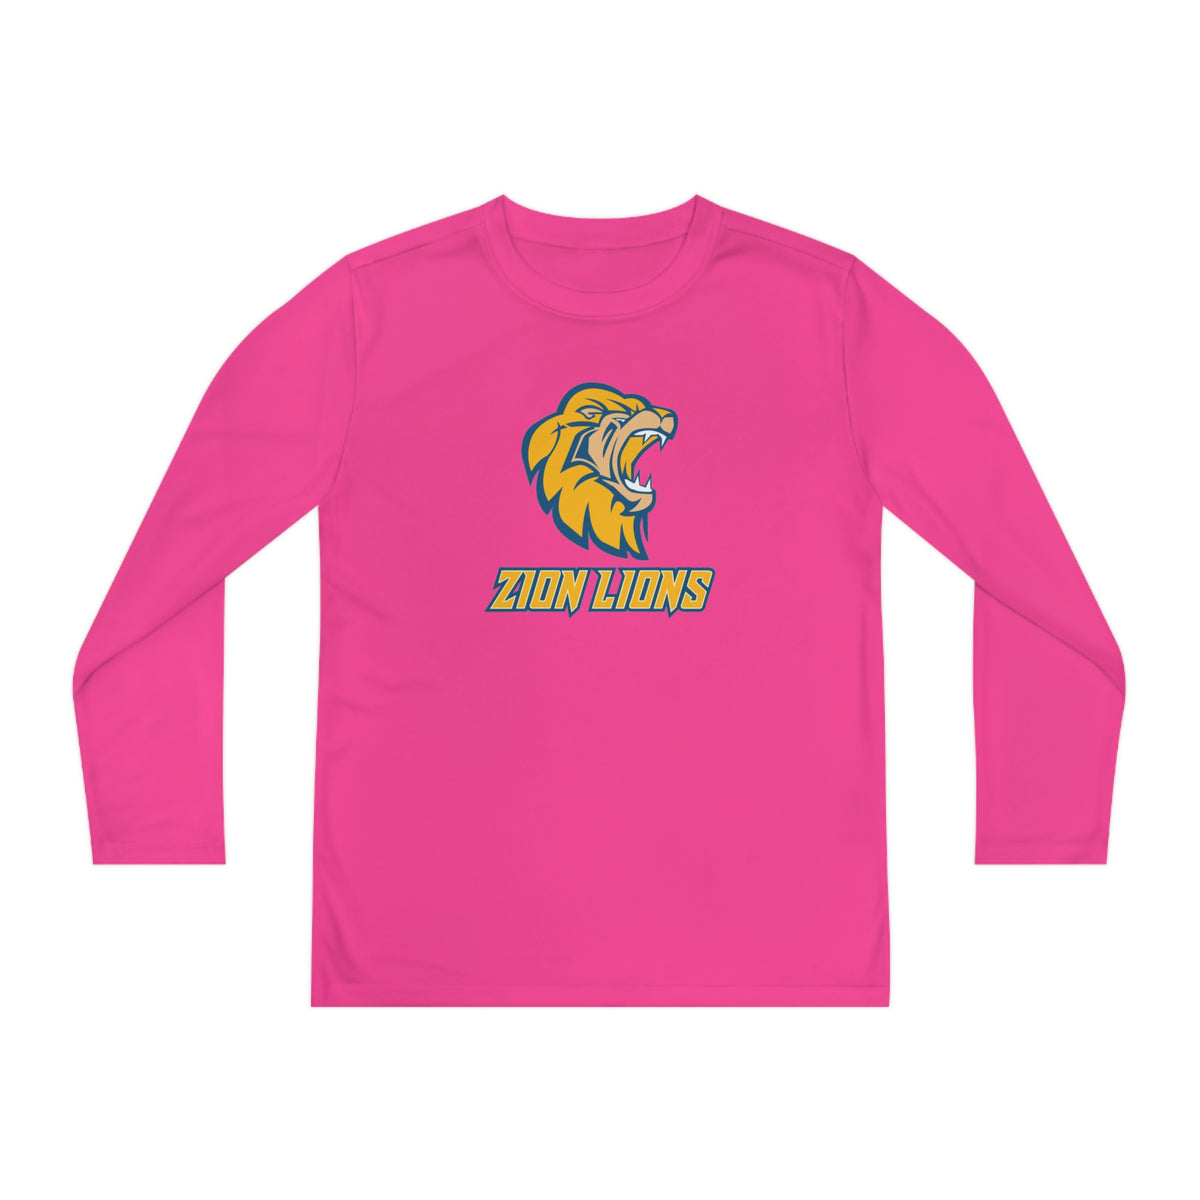 Zion Lions Youth Long Sleeve Competitor Tee